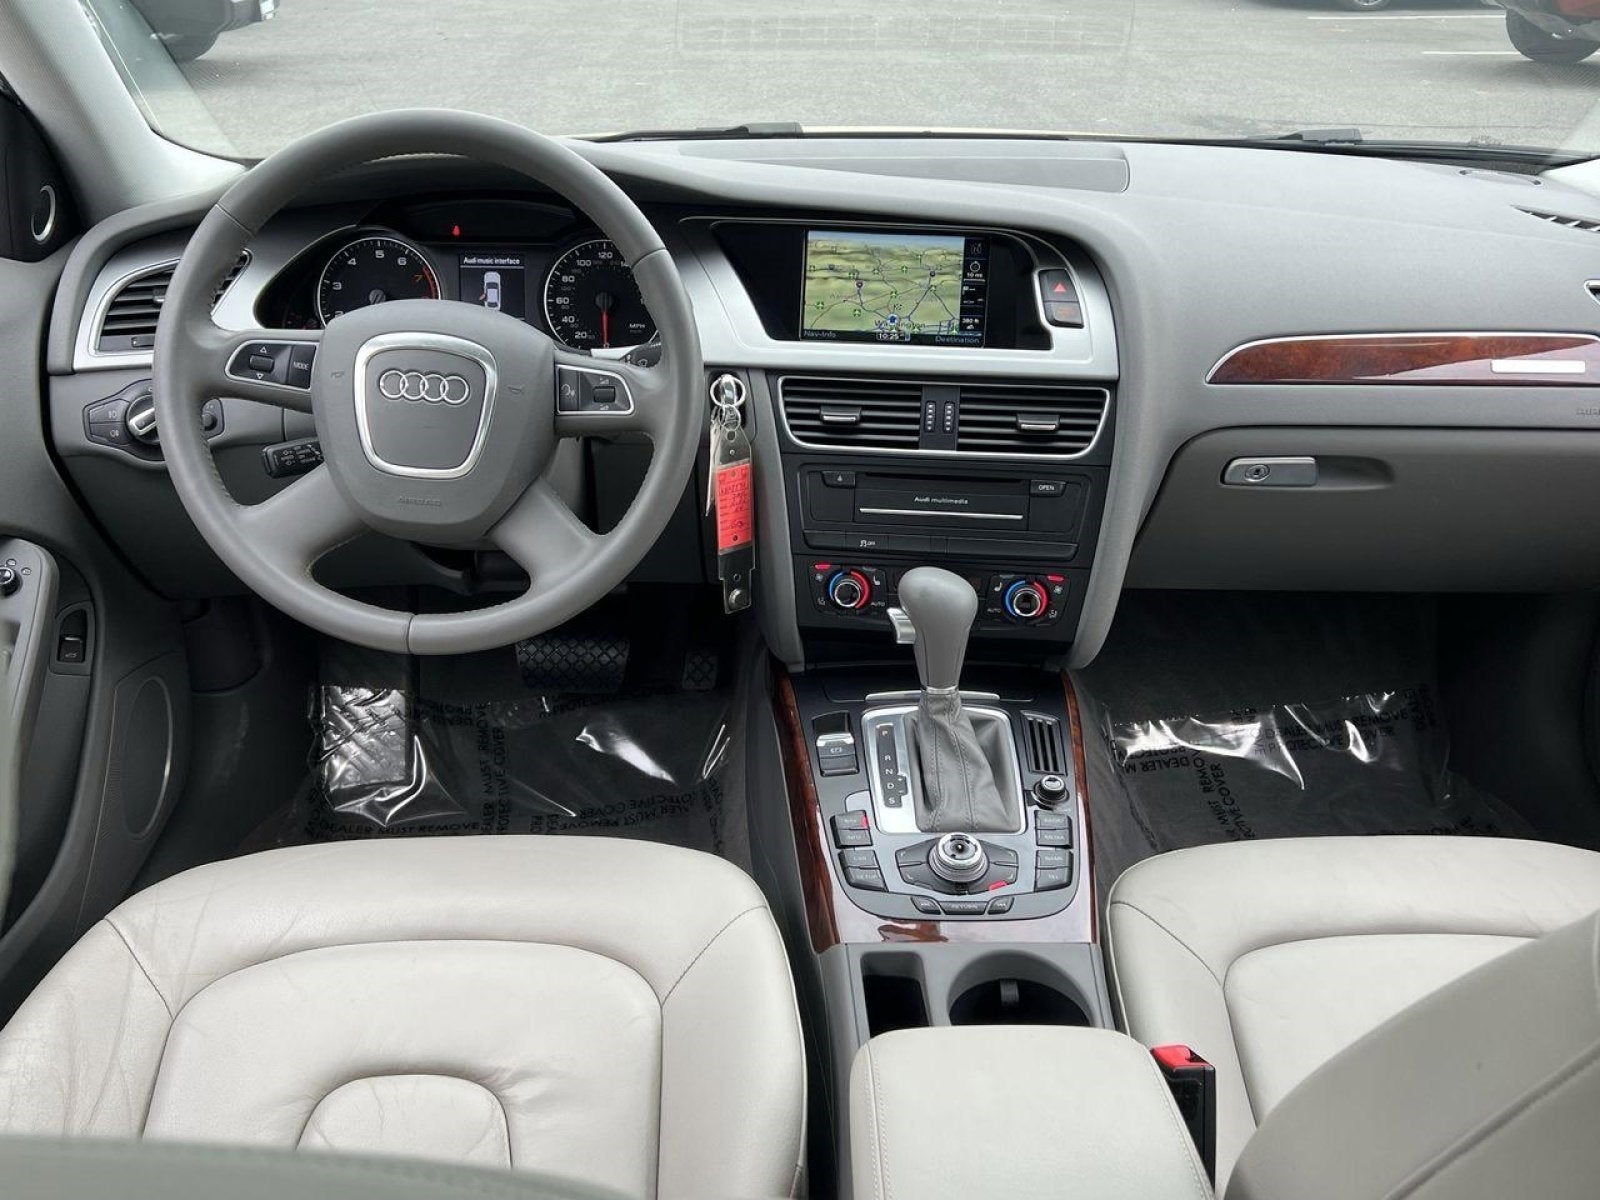 Used 2011 Audi A4 Premium with VIN WAUFFAFL3BA067766 for sale in Vienna, VA